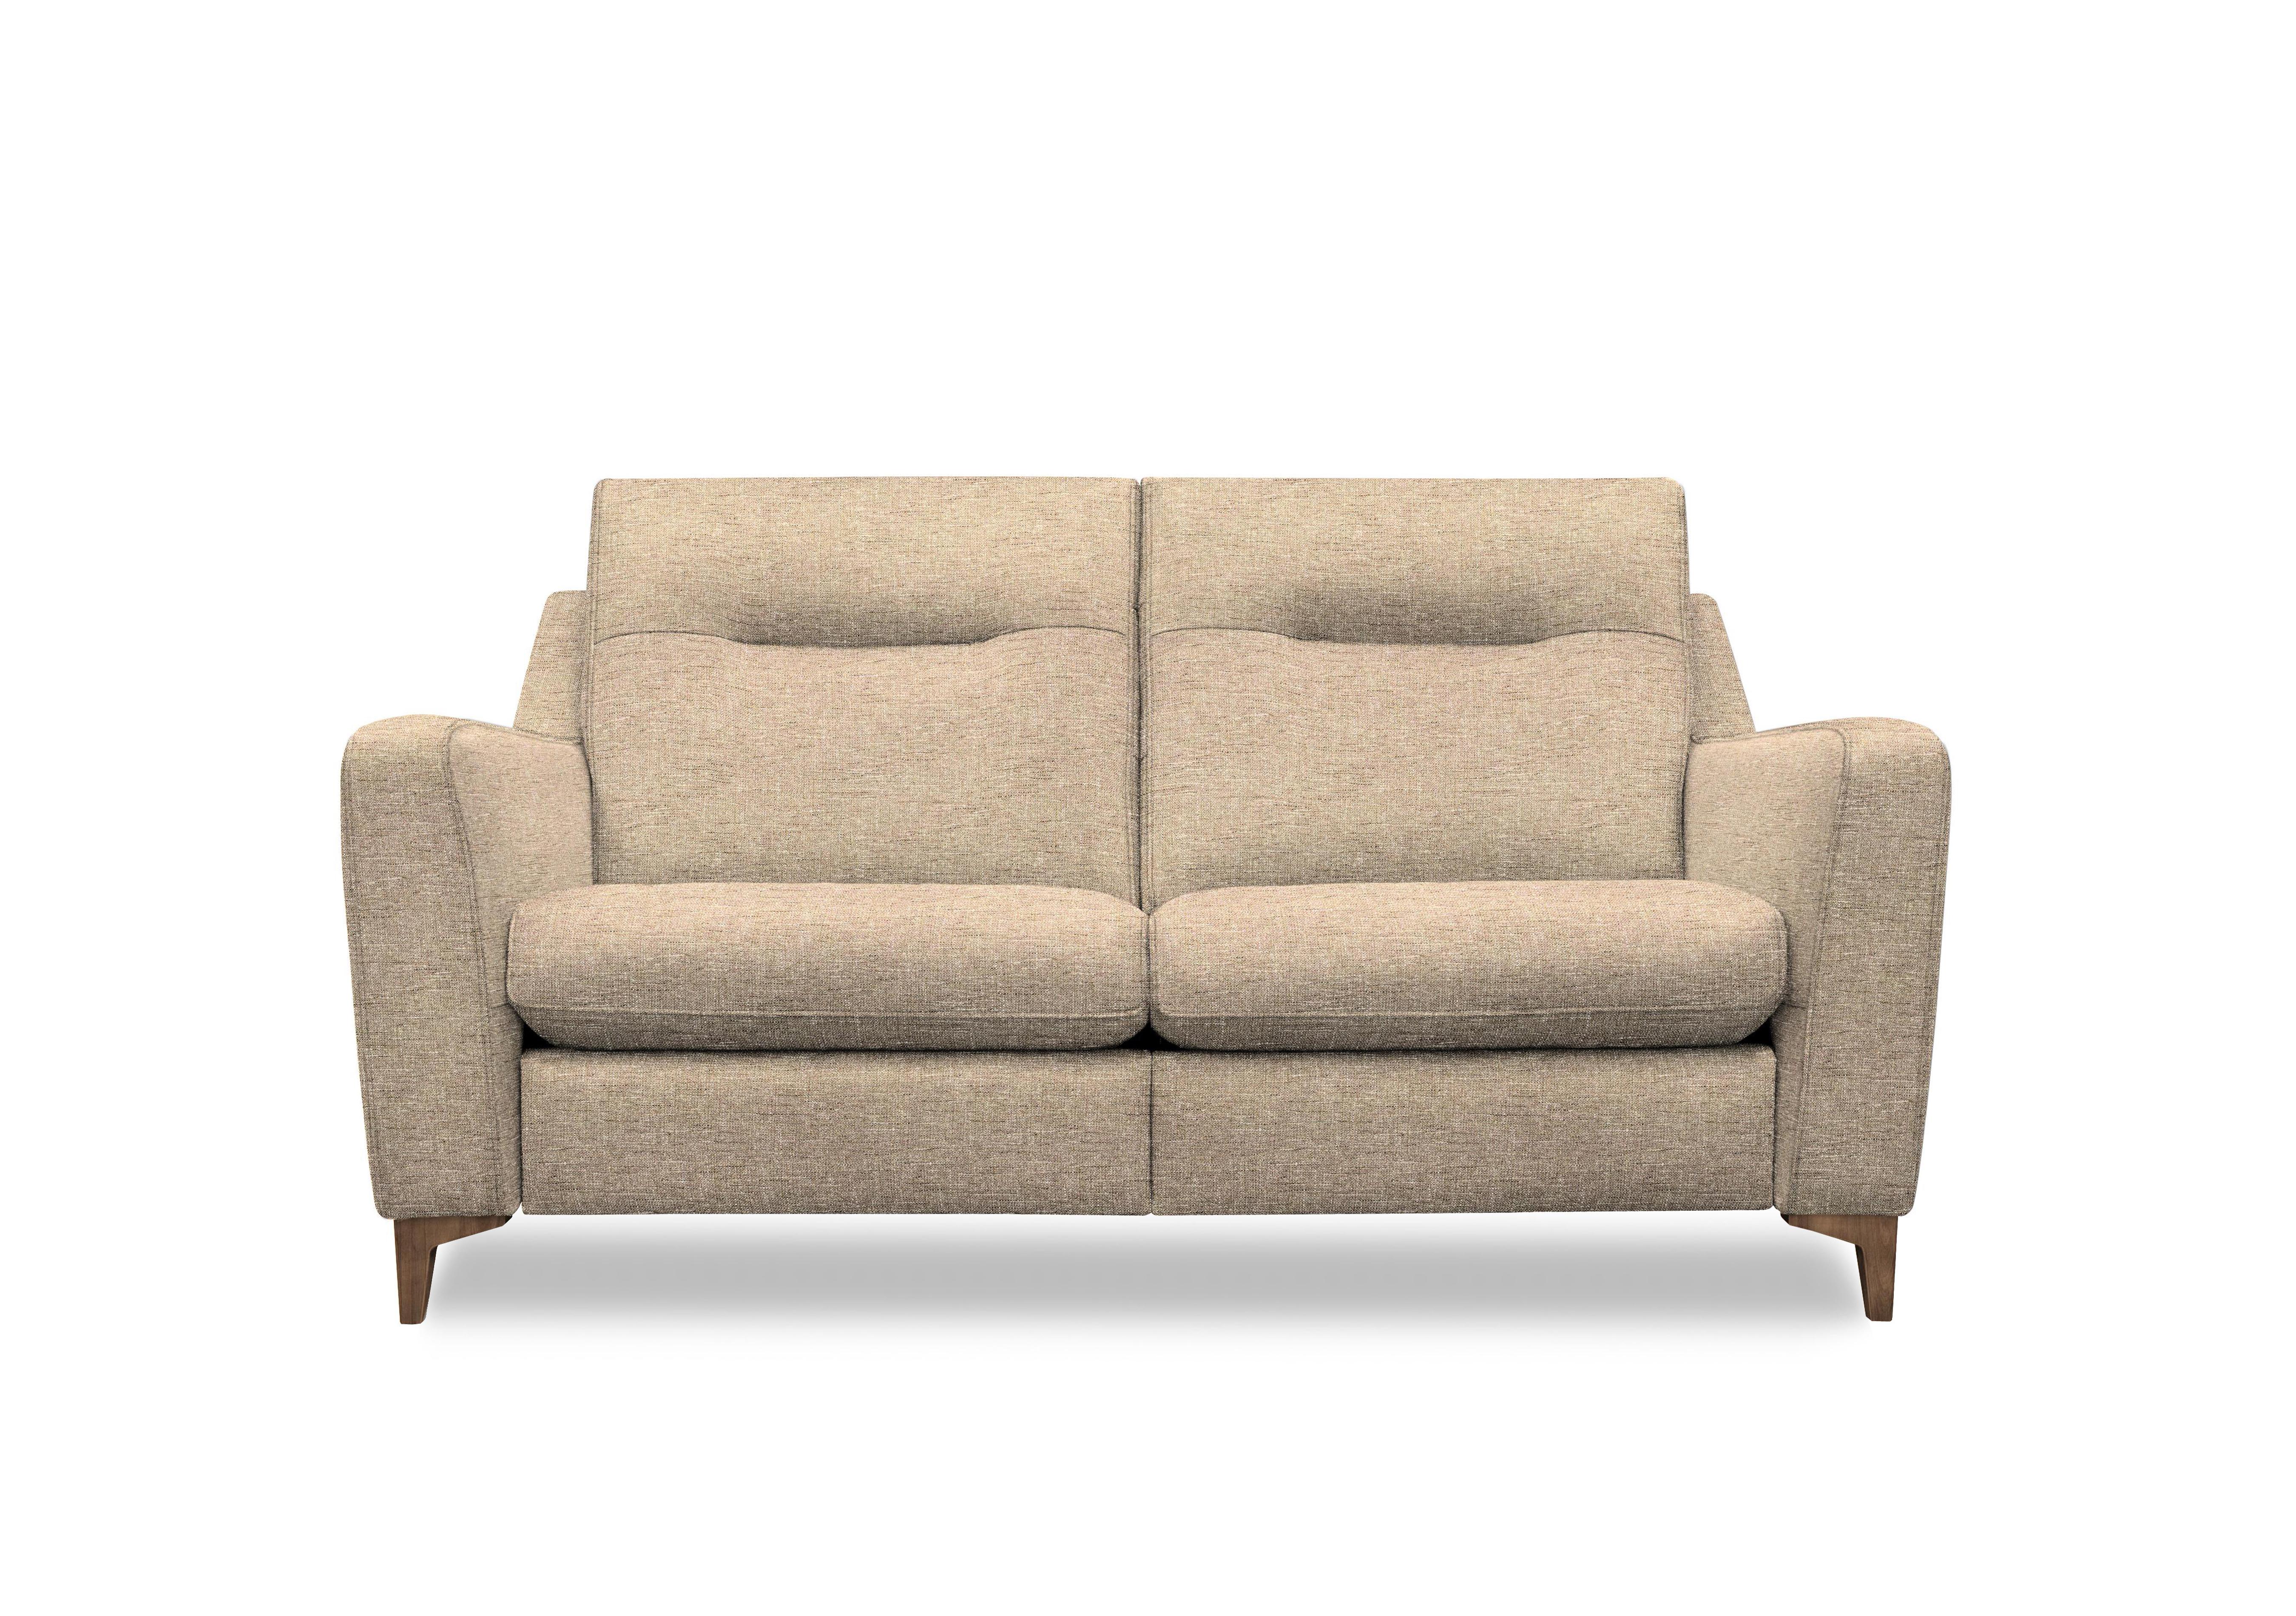 Arlo 2 Seater Fabric Sofa in A022 Dapple Sparrow Wal Ft on Furniture Village